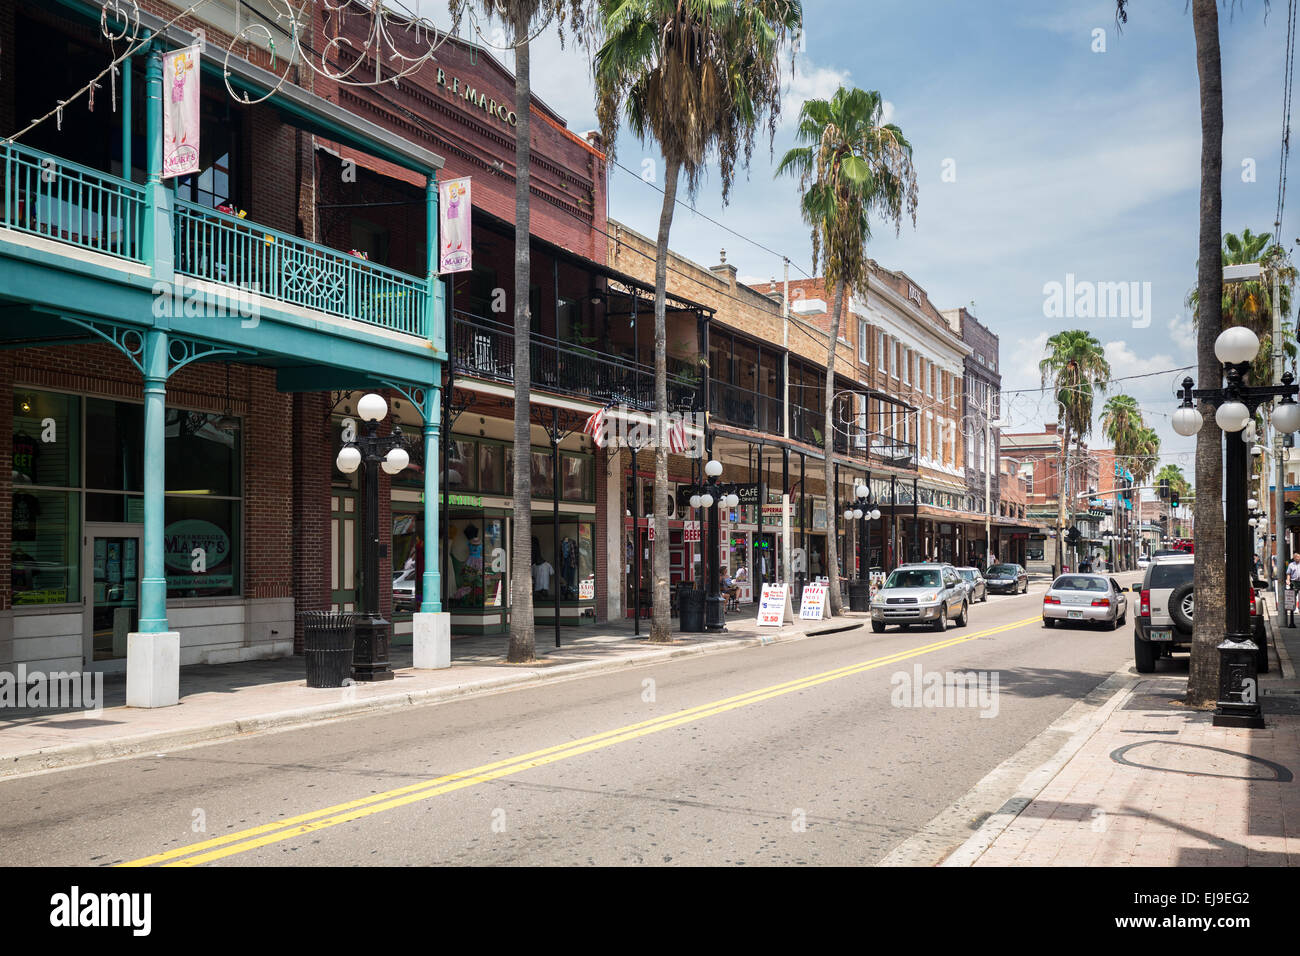 Store in Ybor City in Tampa Florida Stock Photo